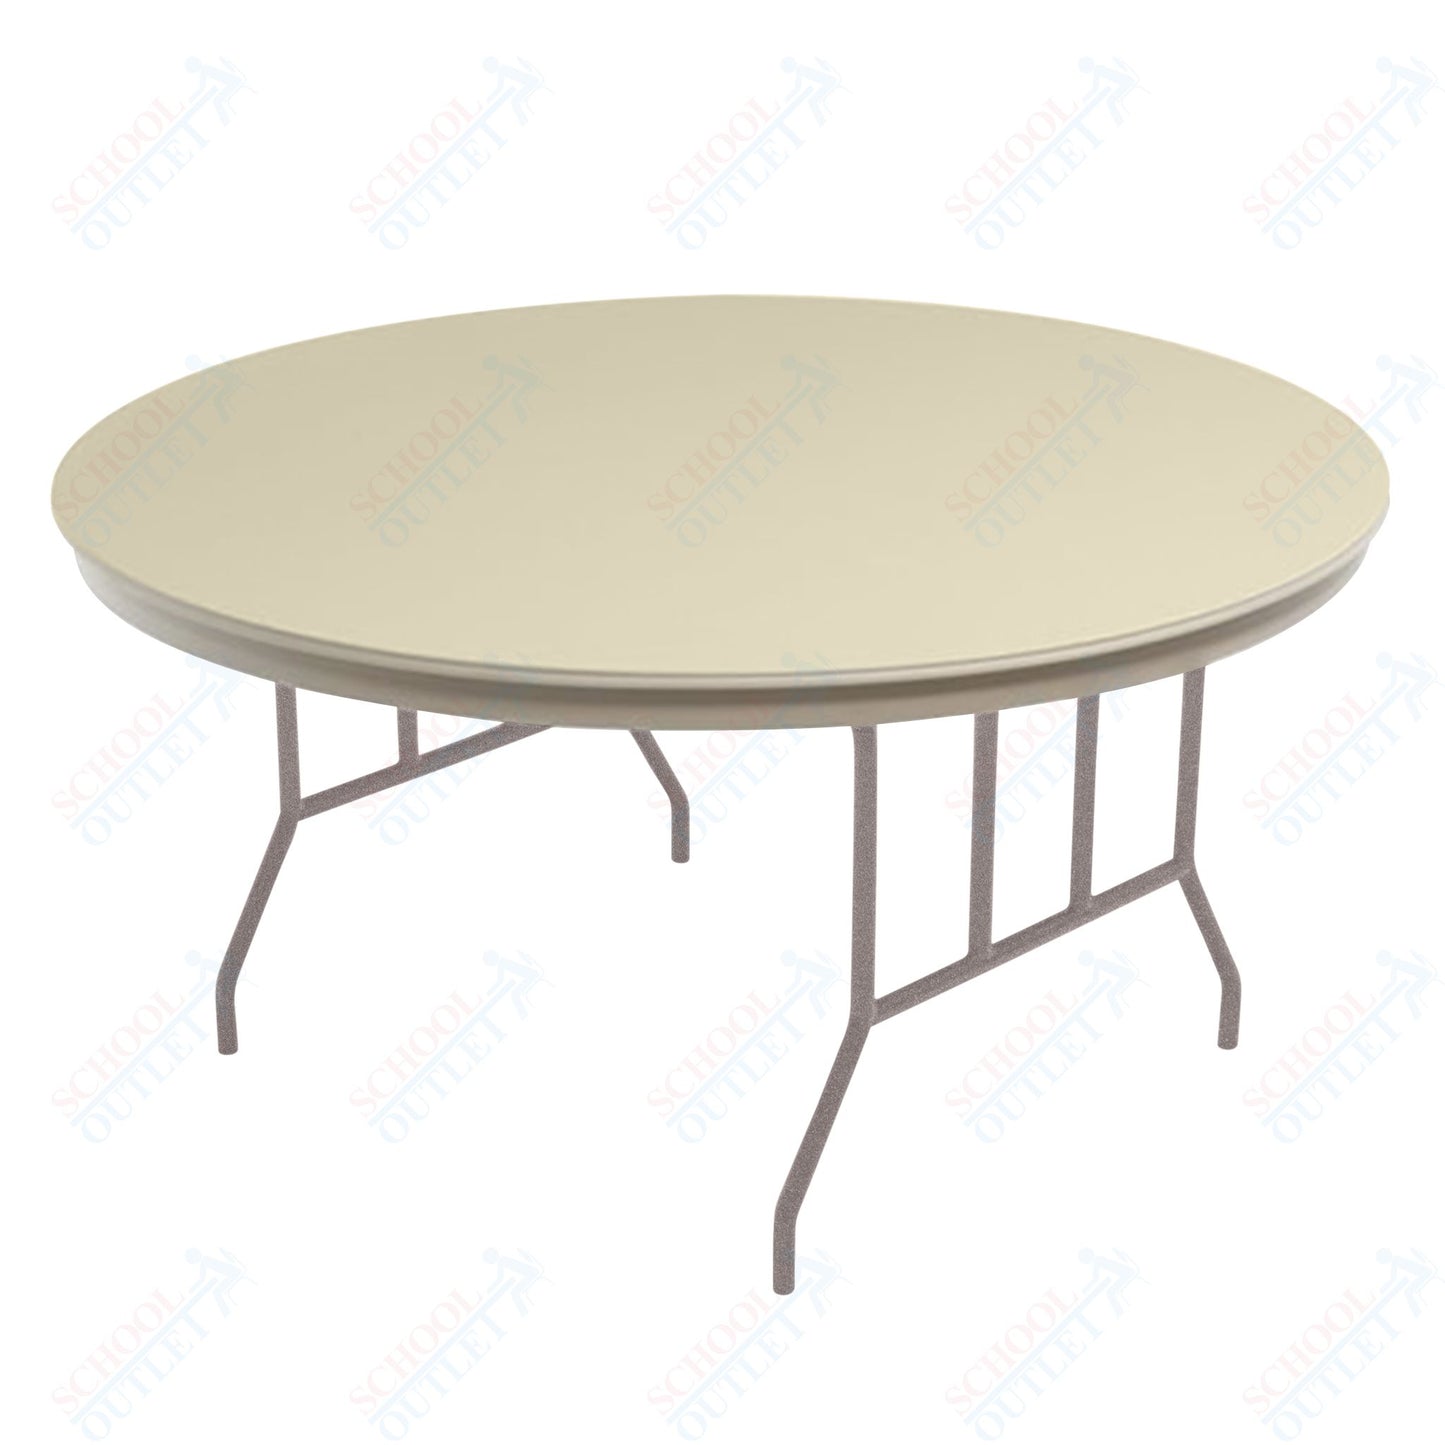 AmTab Dynalite Featherweight Heavy - Duty ABS Plastic Folding Table - Round - 54" Diameter x 29"H (AmTab AMT - R54DL) - SchoolOutlet